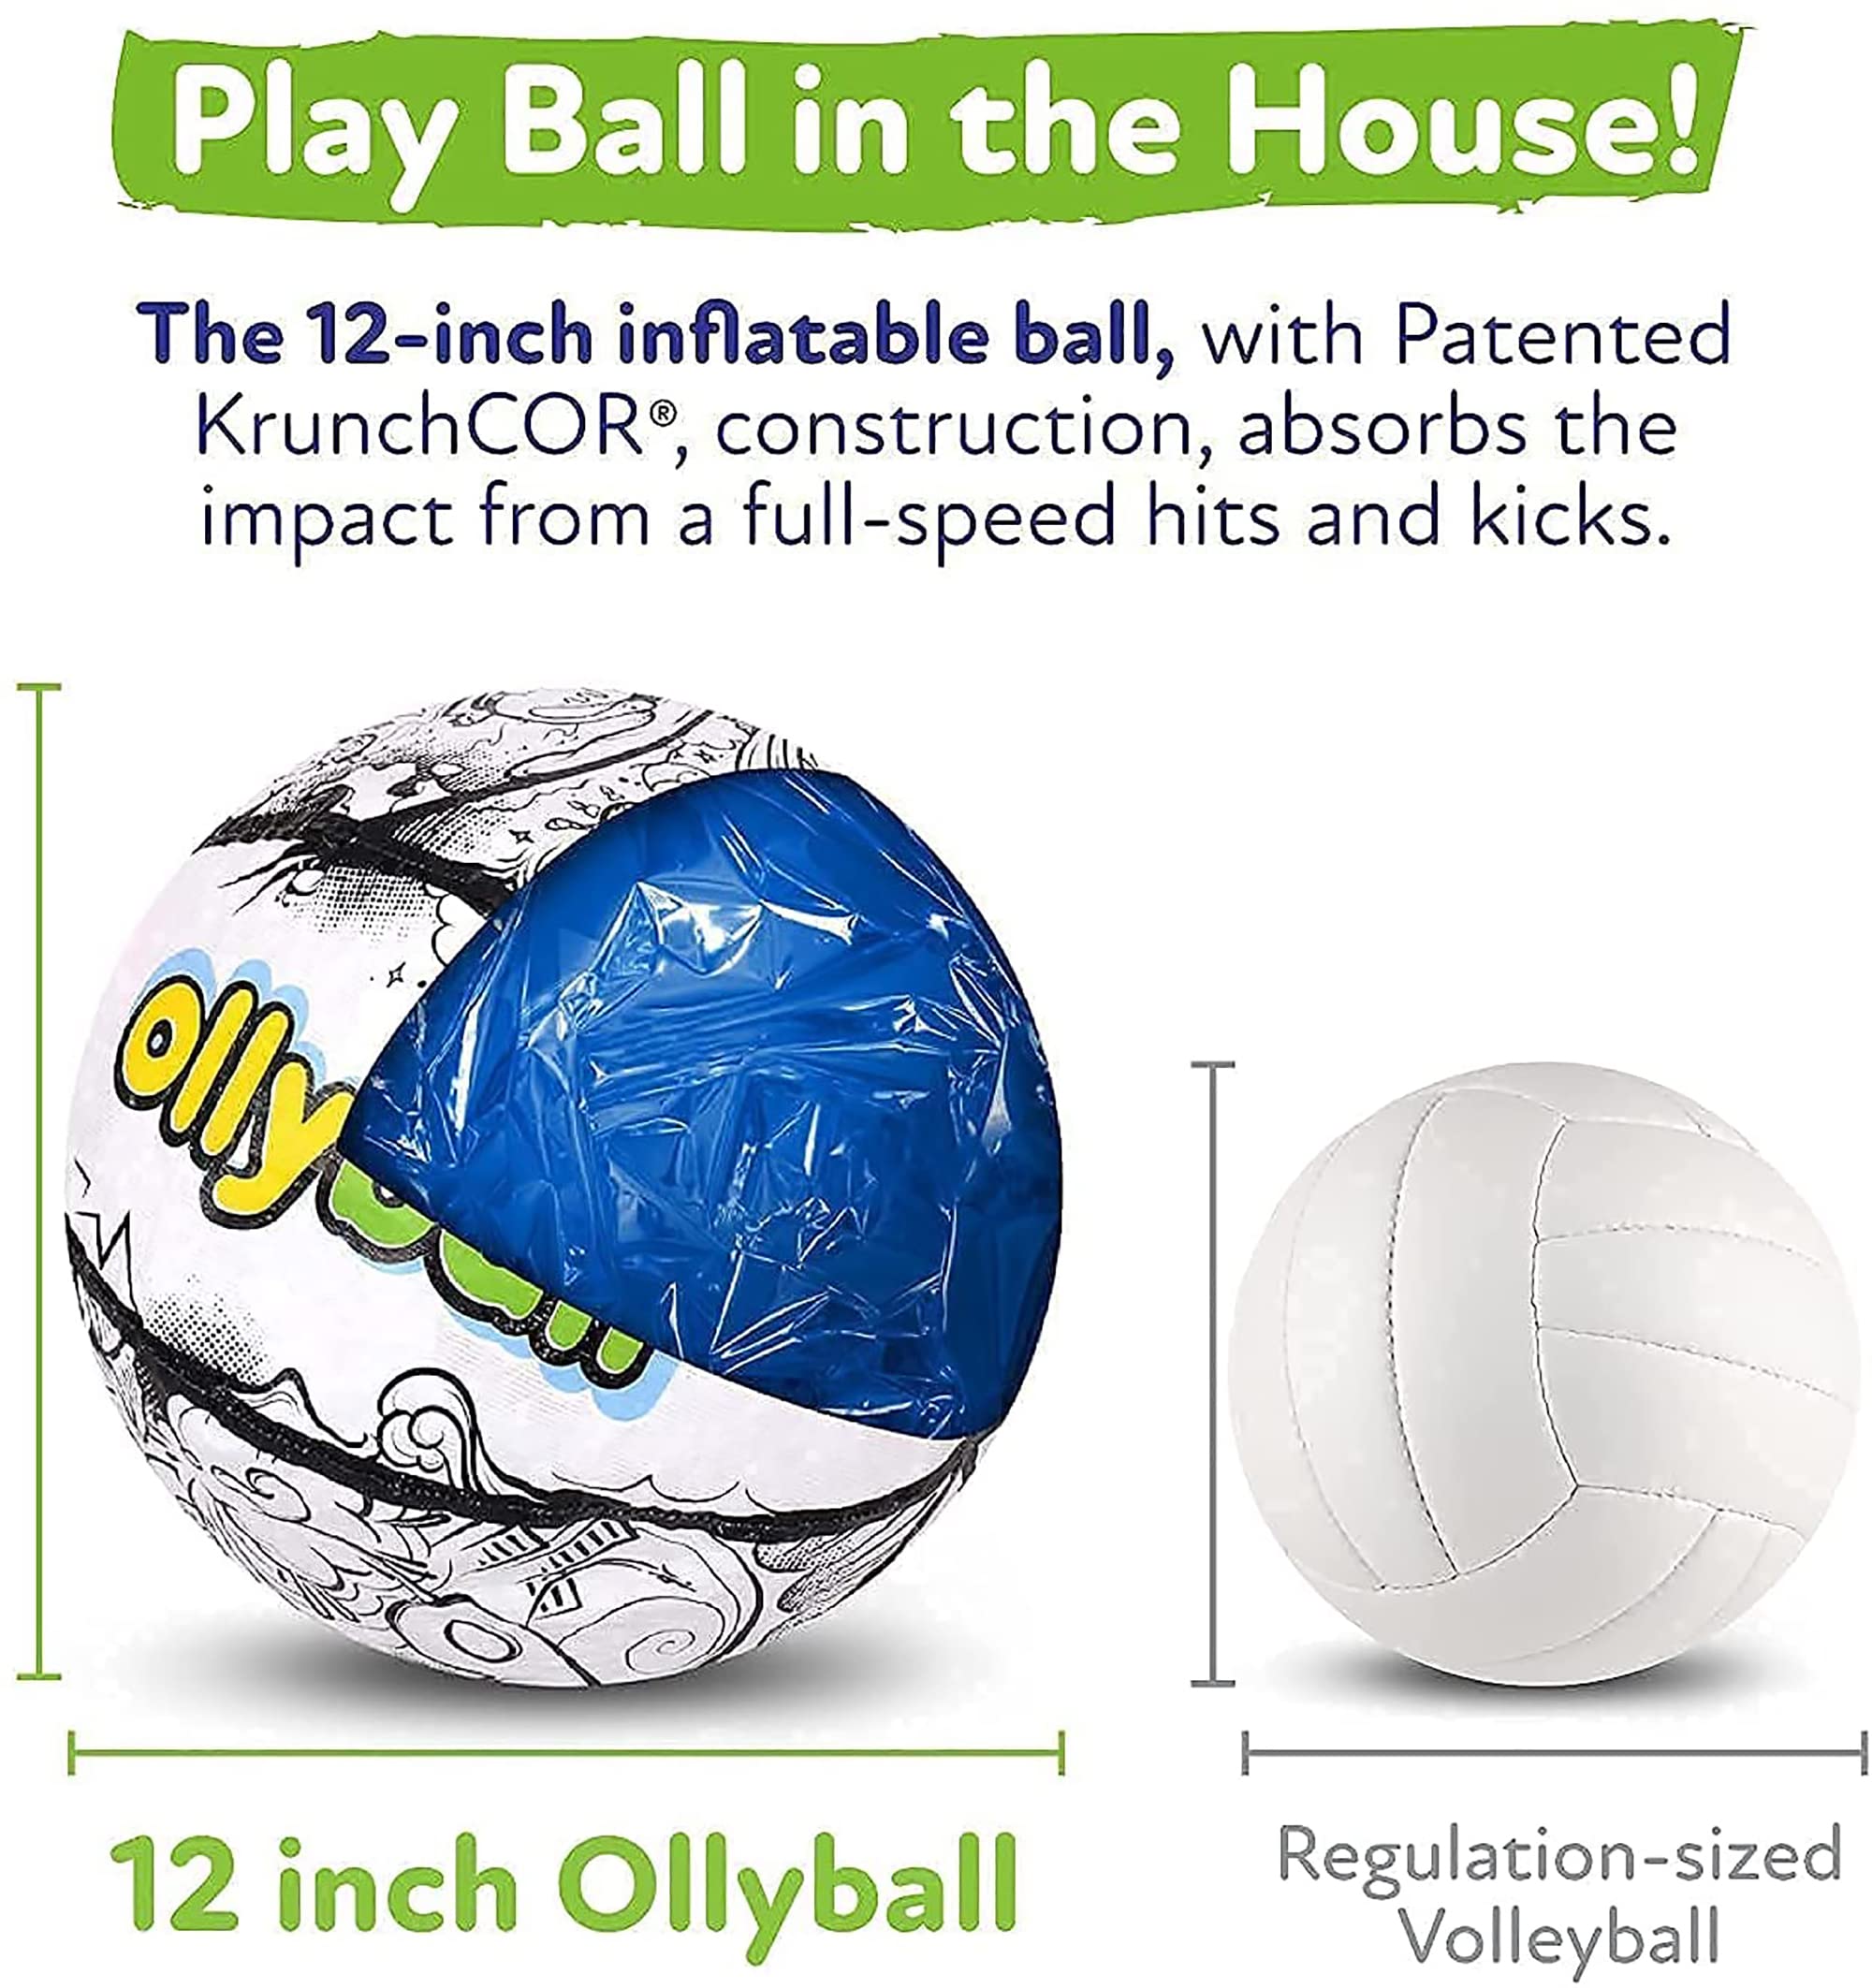 The Original Ollyball - The Ultimate Indoor & Outdoor Play Ball for Kids and Parents!